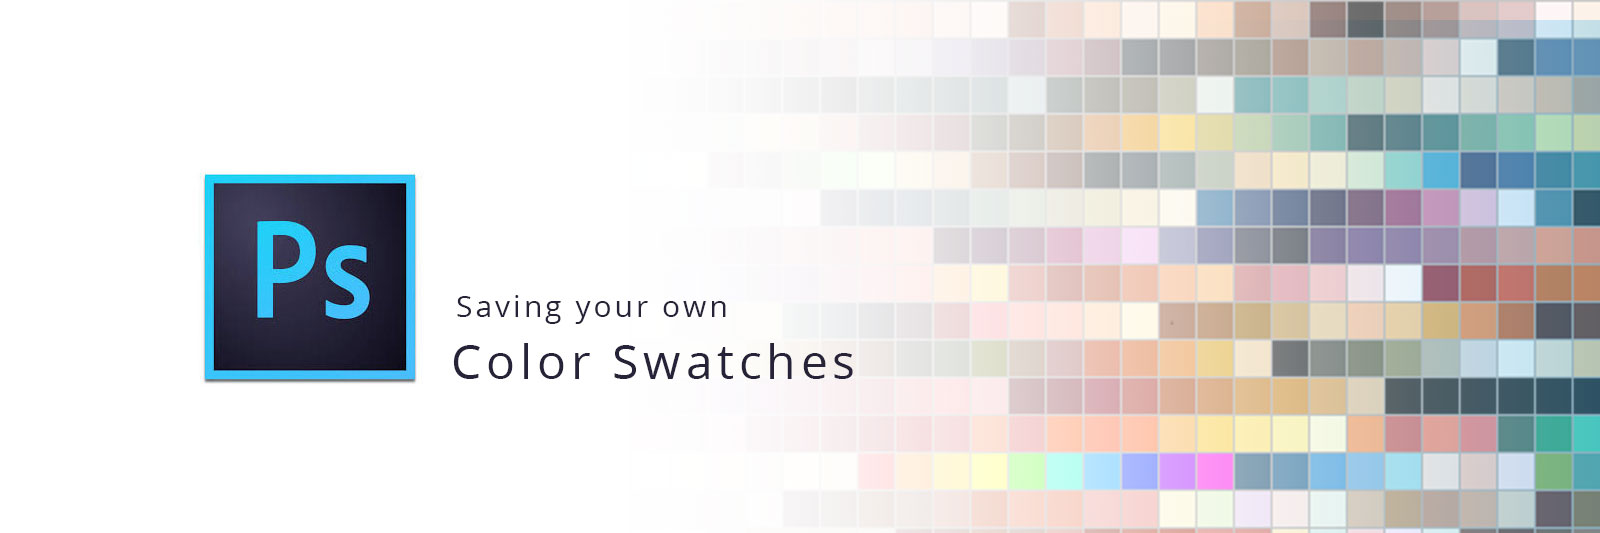 Adding you own color swatches in photoshop for best color selecetion